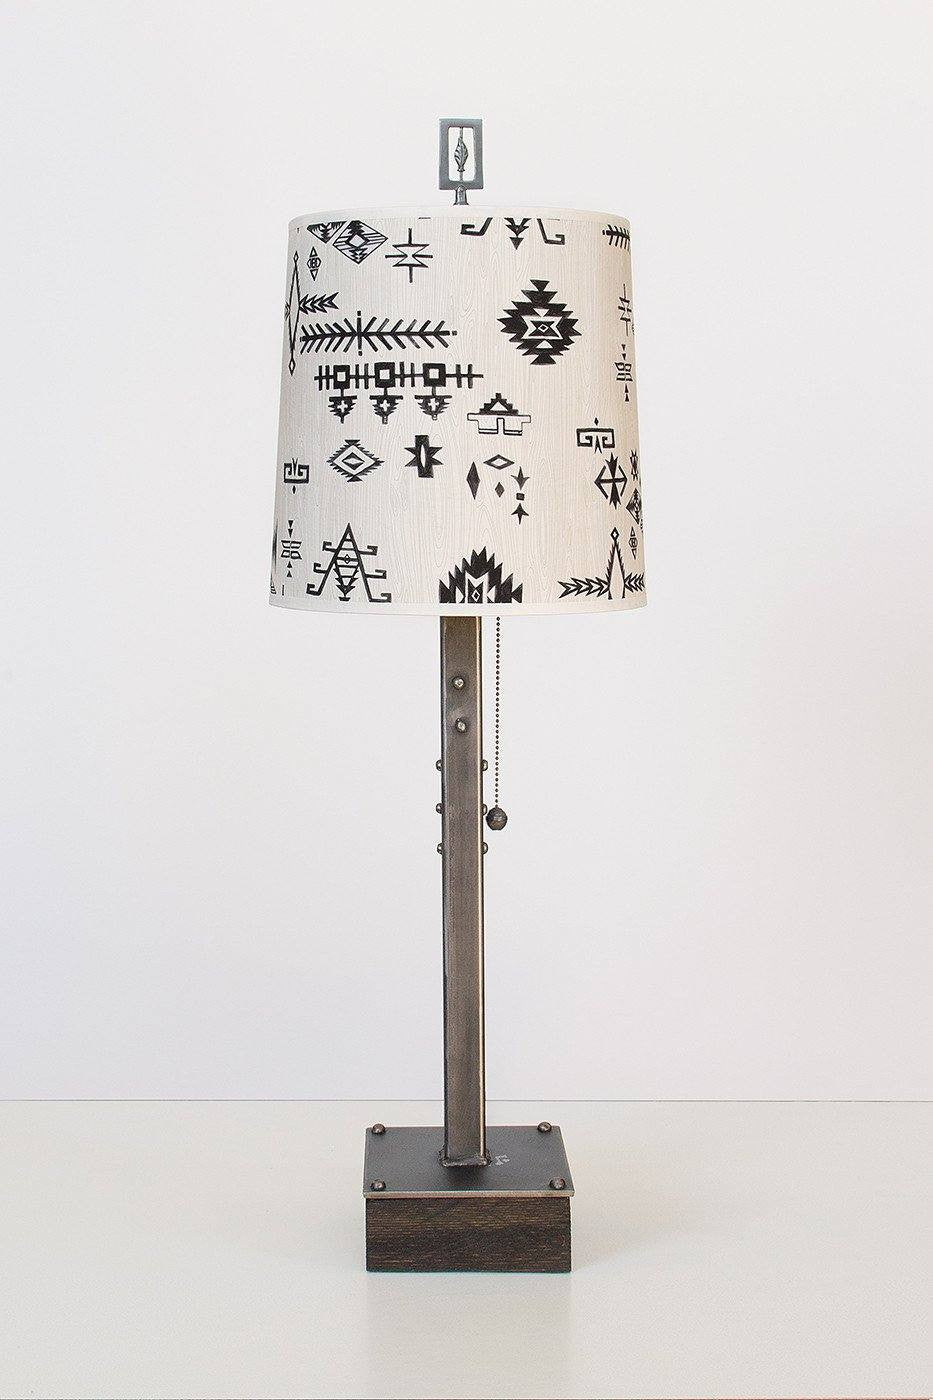 Janna Ugone & Co Table Lamps Steel Table Lamp on Wood with Medium Drum Shade in Blanket Sketch